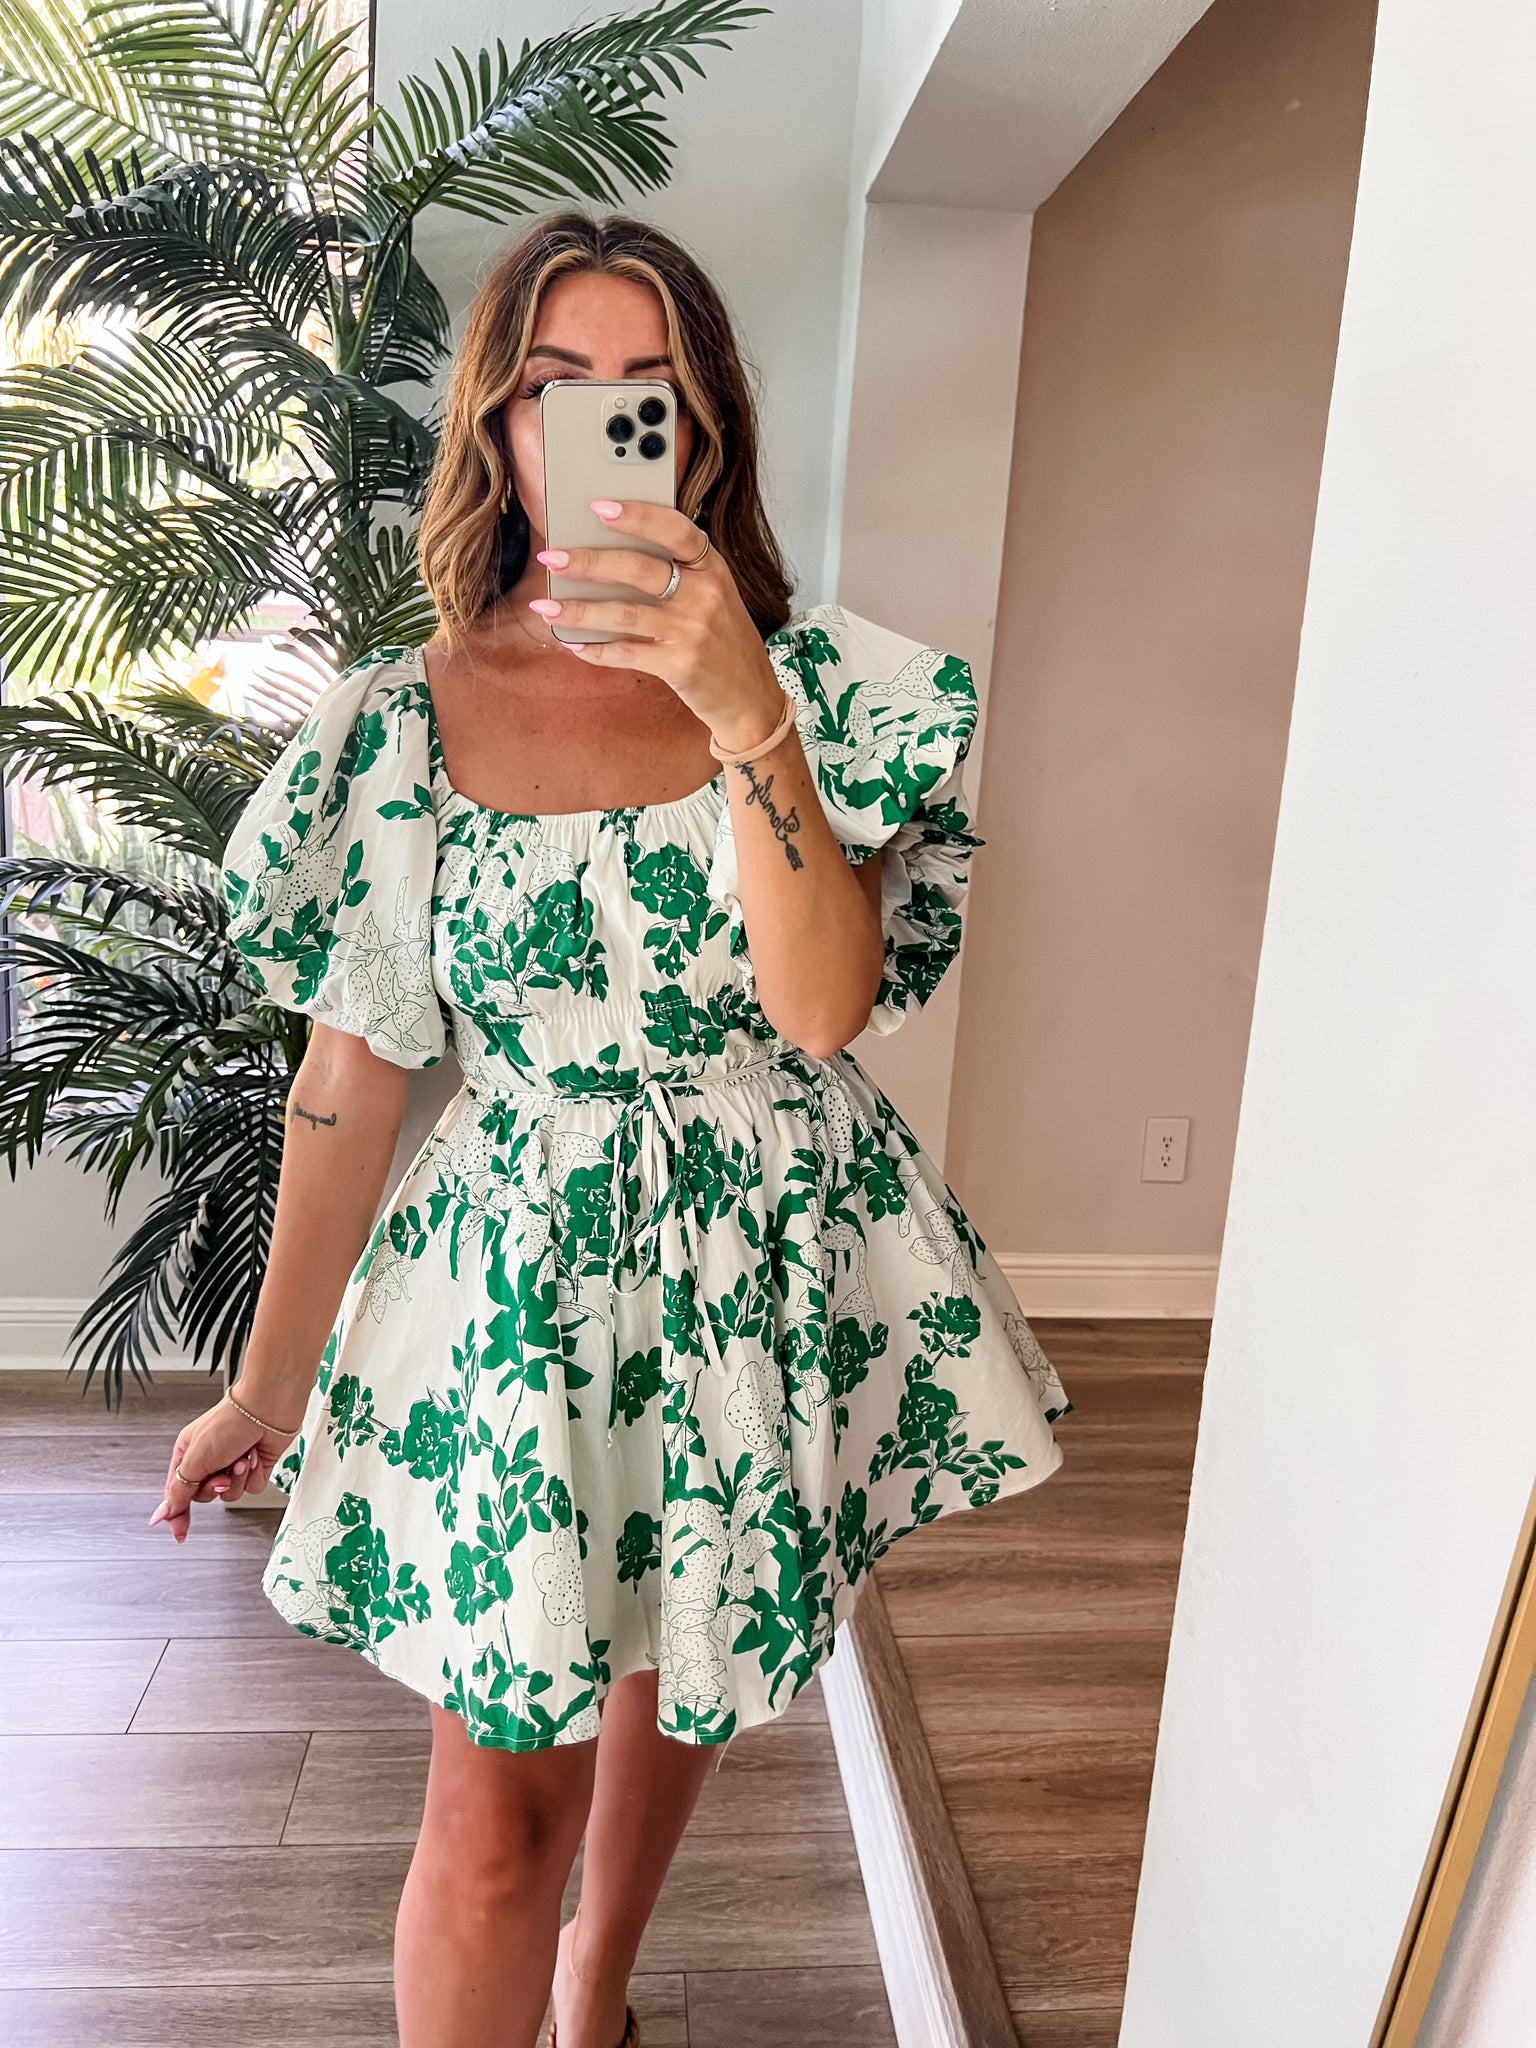 The Green Floral Dress